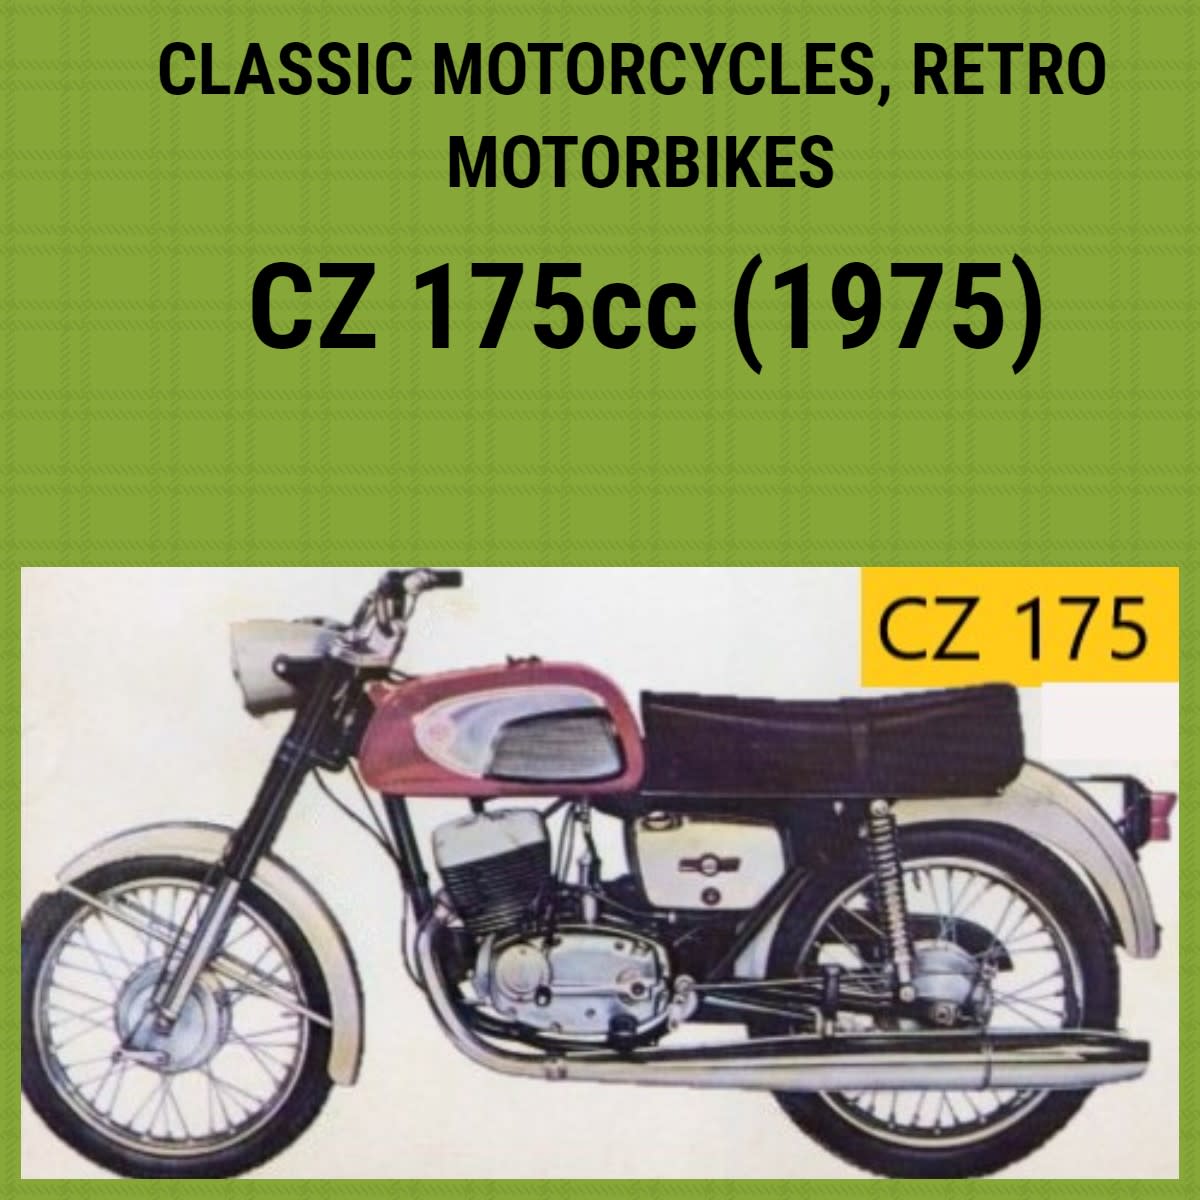 jawa-cz-175cc-first-motorcycle-in-1975